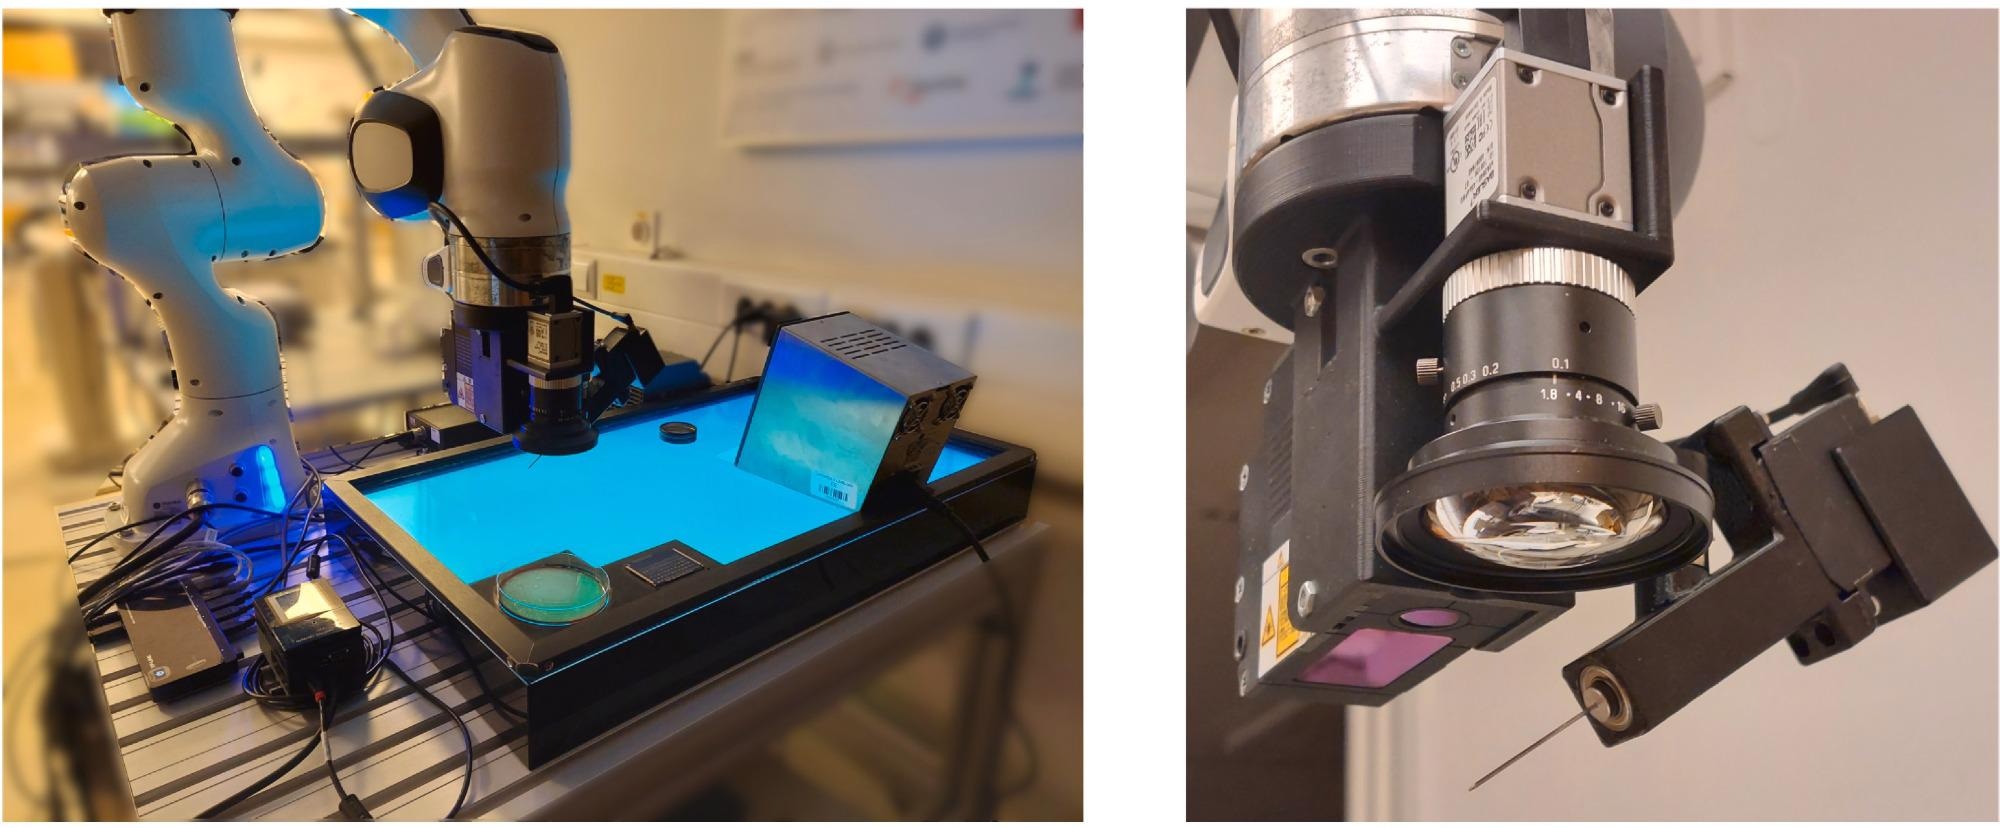 Overview of the experiment setup (left) and the end-effector tool (right).